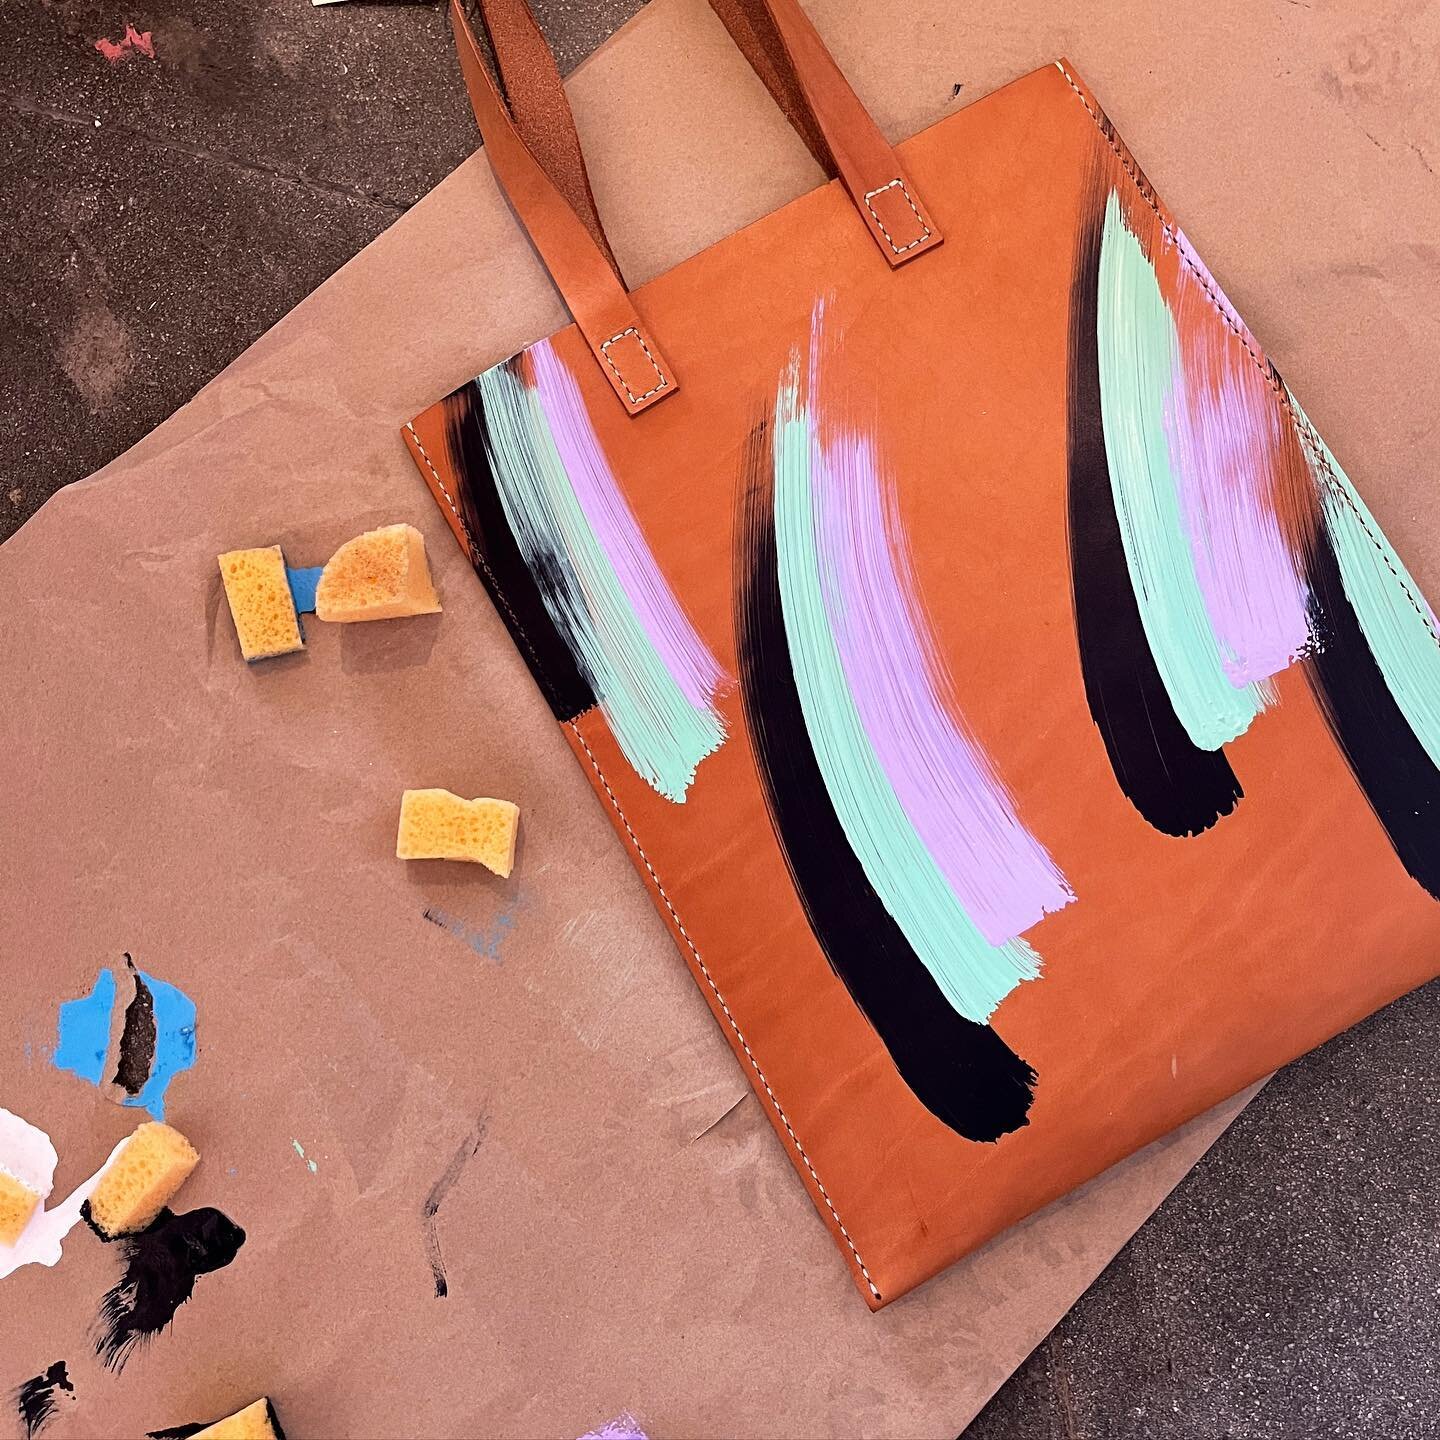 Painted Flat Tote.
100% handmade
+ hand-stitched / painted
One-of-a-kind. 
14&rdquo; wide.
17&rdquo; tall.
9&rdquo; handle drop. 

Available in-store or through DM.

$600

#HandmadeLeathertote #ContemporaryDesign #VegTanCraft #MadeInLA #NaturalStyle 